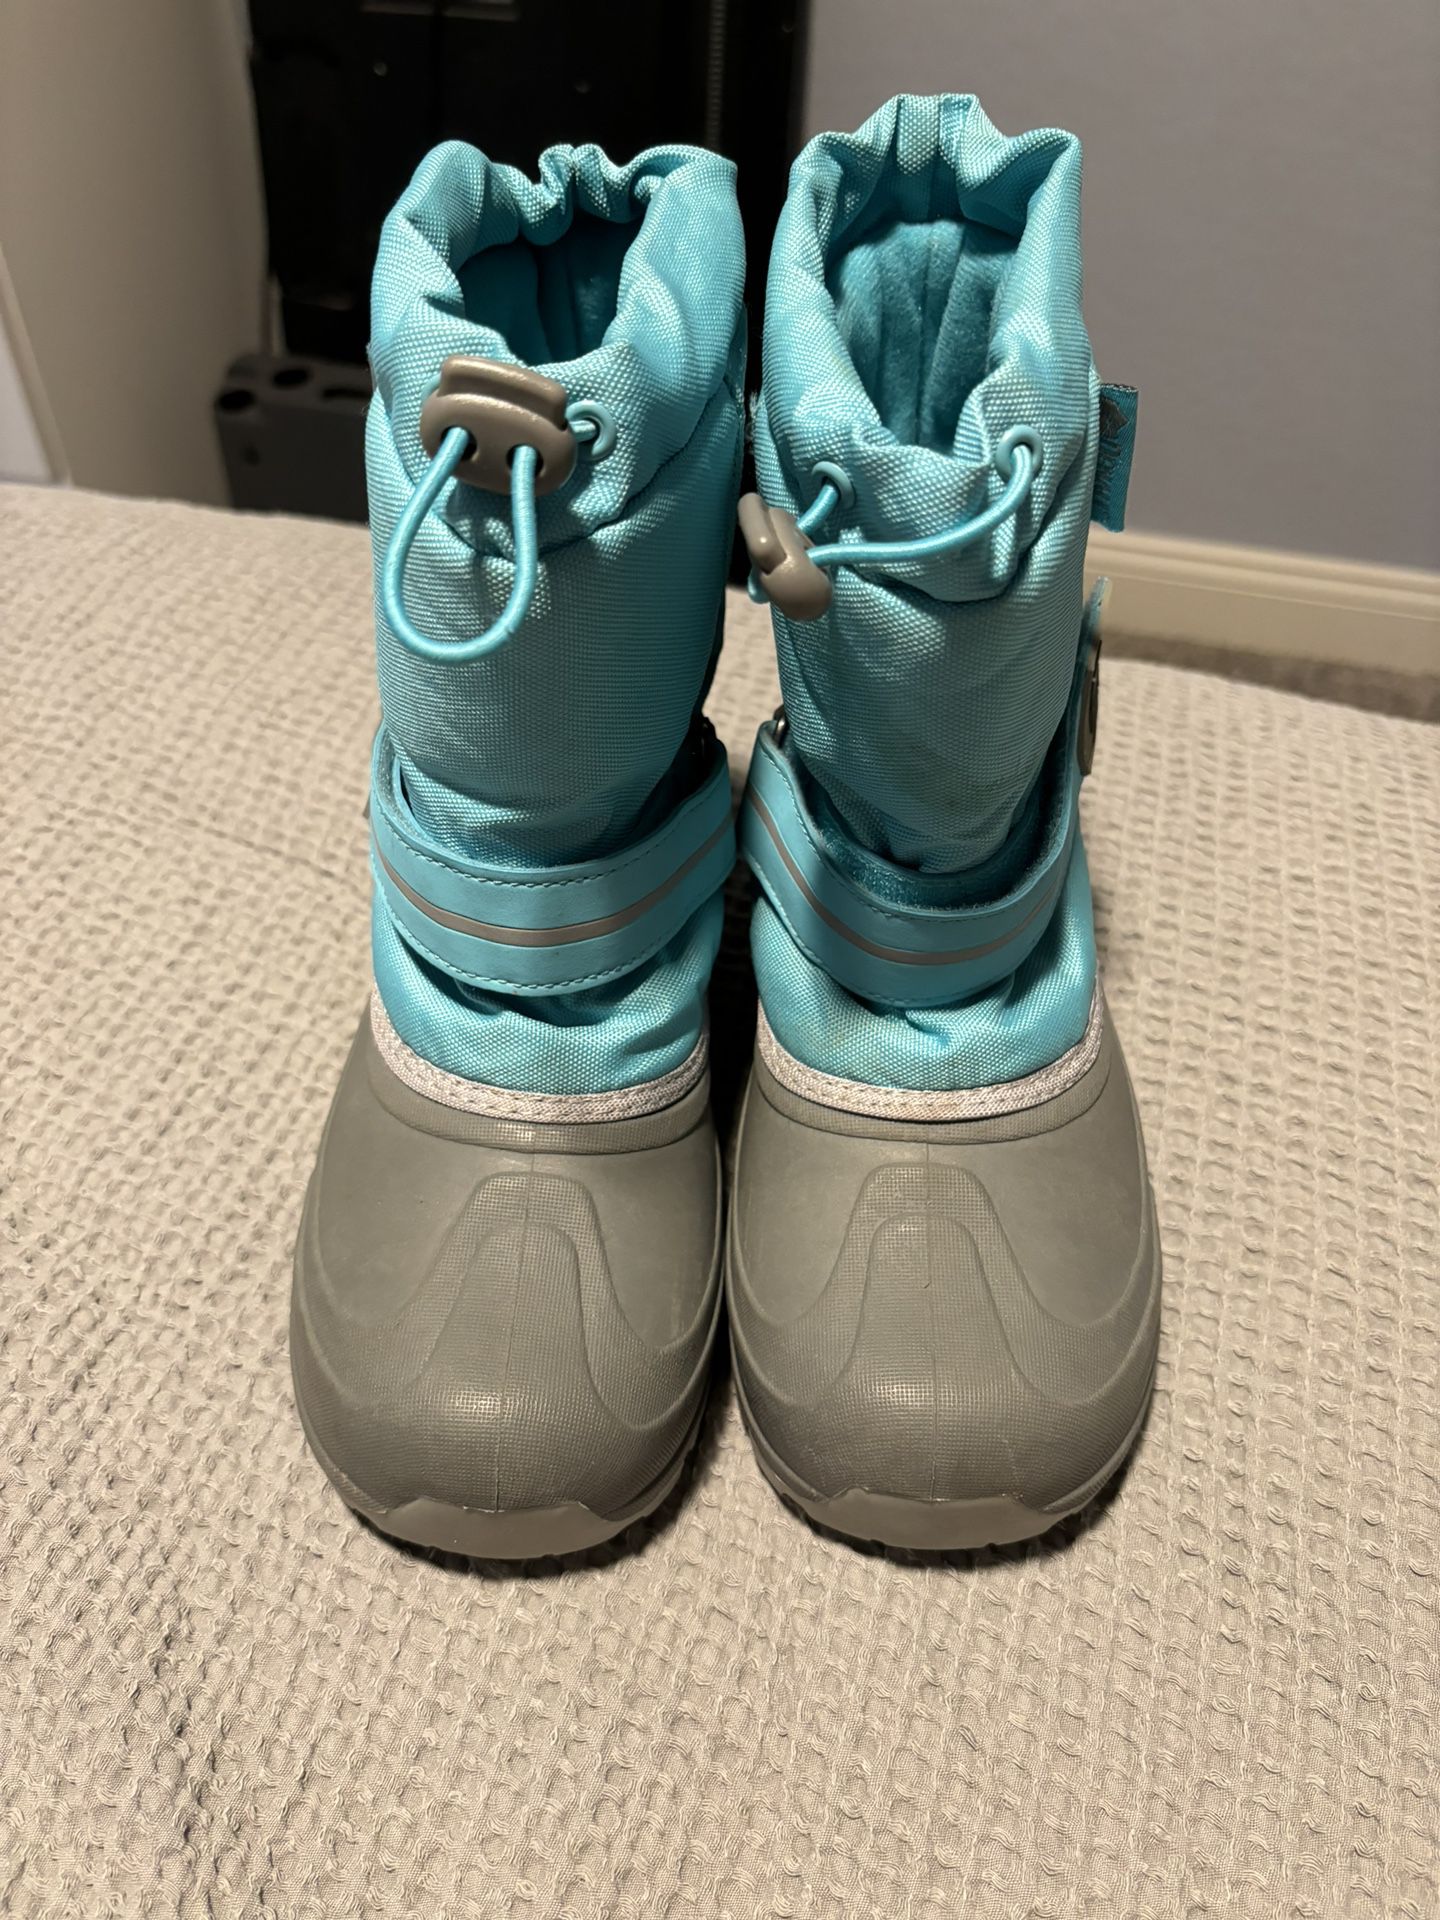 Girl Snow Boots